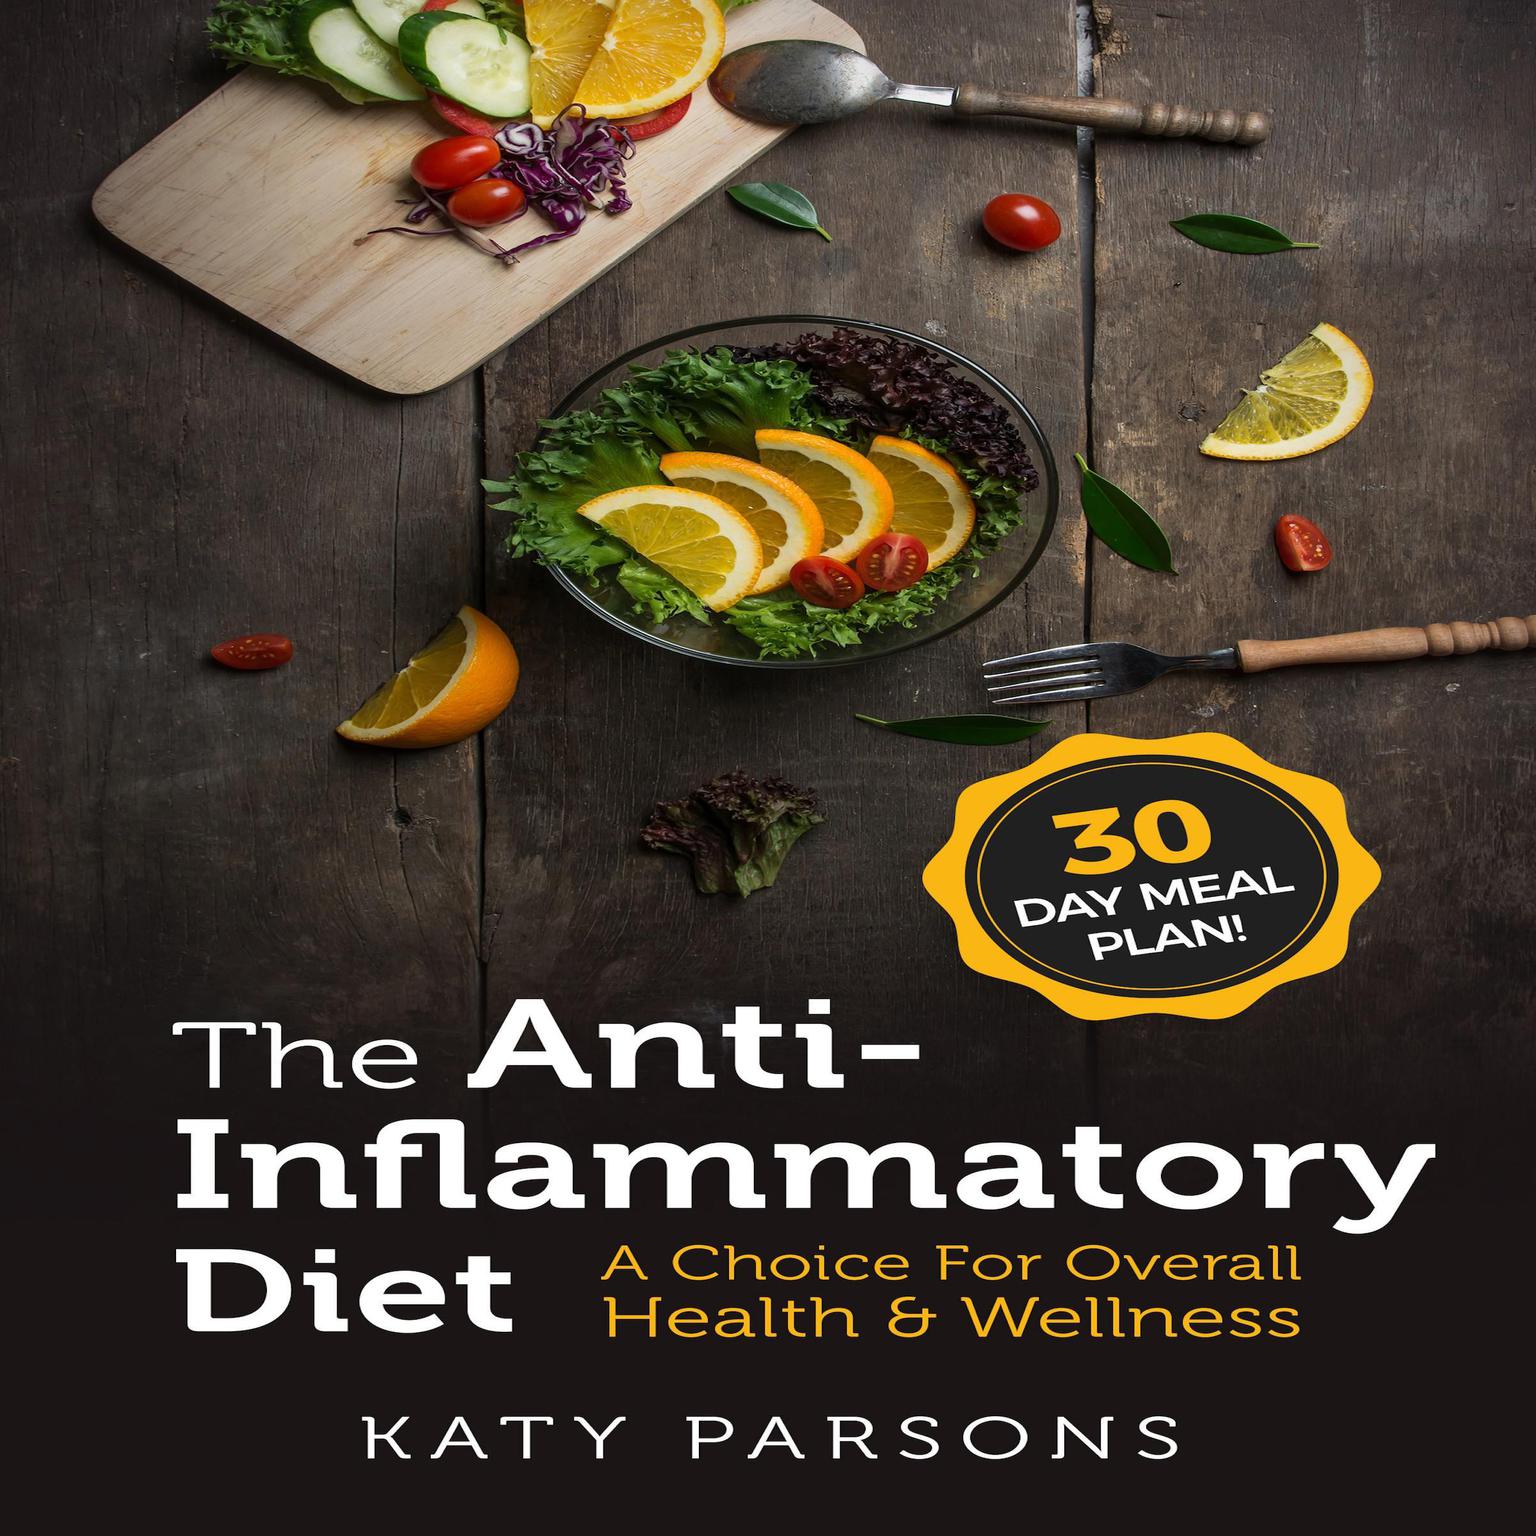 The Anti-Inflammatory Diet: A Choice For Overall Health & Wellness Audiobook, by Katy Parsons